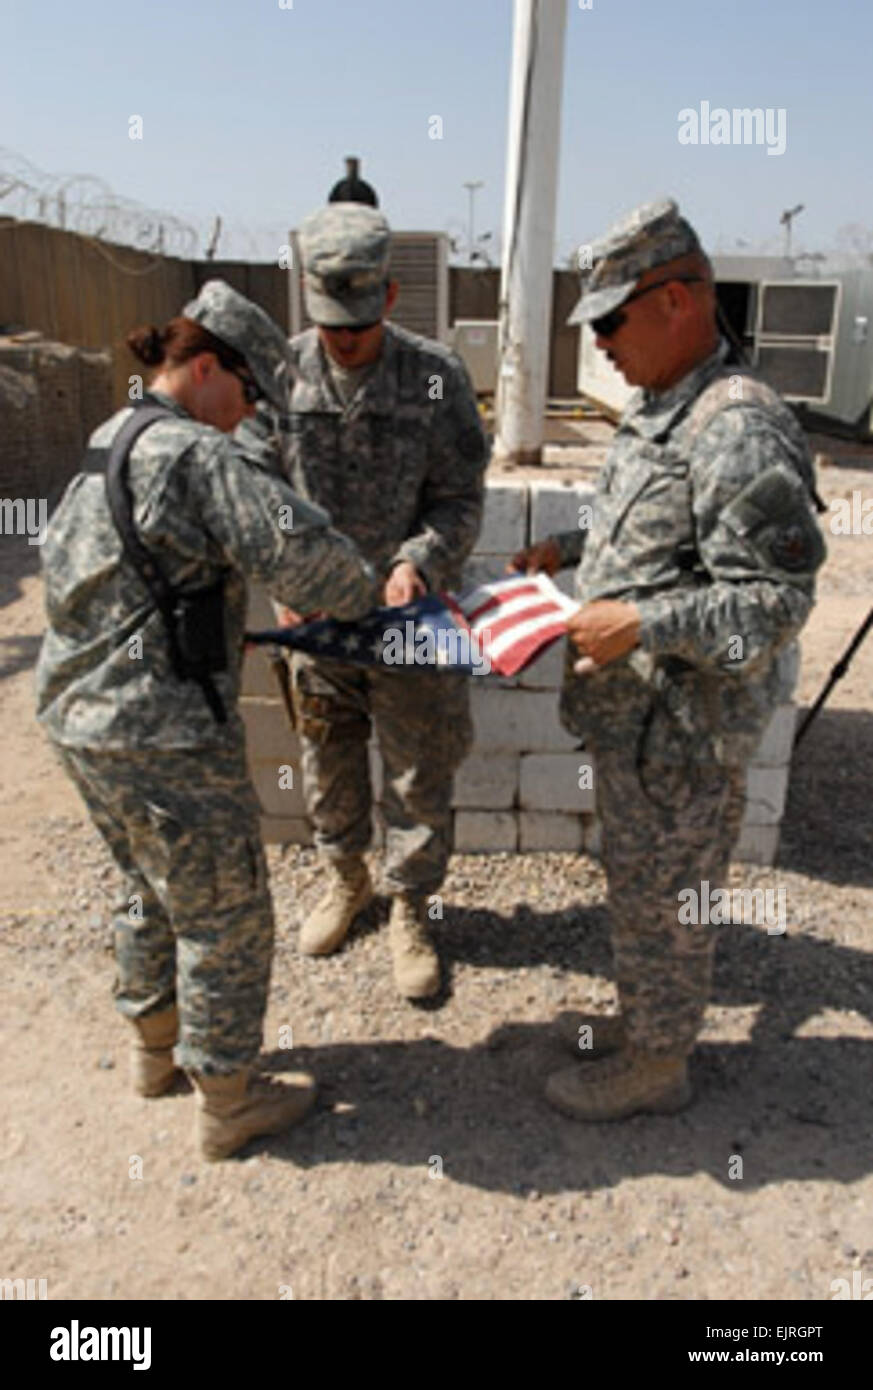 Sgt. 1st Class Sherry Ellithorpe, Patrol Base Shaibah Logistics Military Advisory Team noncommissioned officer in charge, Sgt. Joshua Garriott, PB Shaibah LMAT fuel advisor, and Staff Sgt. Alejandro  Montano, PB Shaibah LMAT, fold the U.S. flag after lowering it for the final time at PB Shaibah, March 30, 2010. The base was returned to full Iraqi control during a March 30 ceremony. Photo credit: Sgt. Benjamin Kibbey.  U.S. transfers facilities to Iraqi control as drawdown continues  /-news/2010/04/07/36947-us-transfers-facilities-to-iraqi-control-as-drawdown-continues/index.html Stock Photo